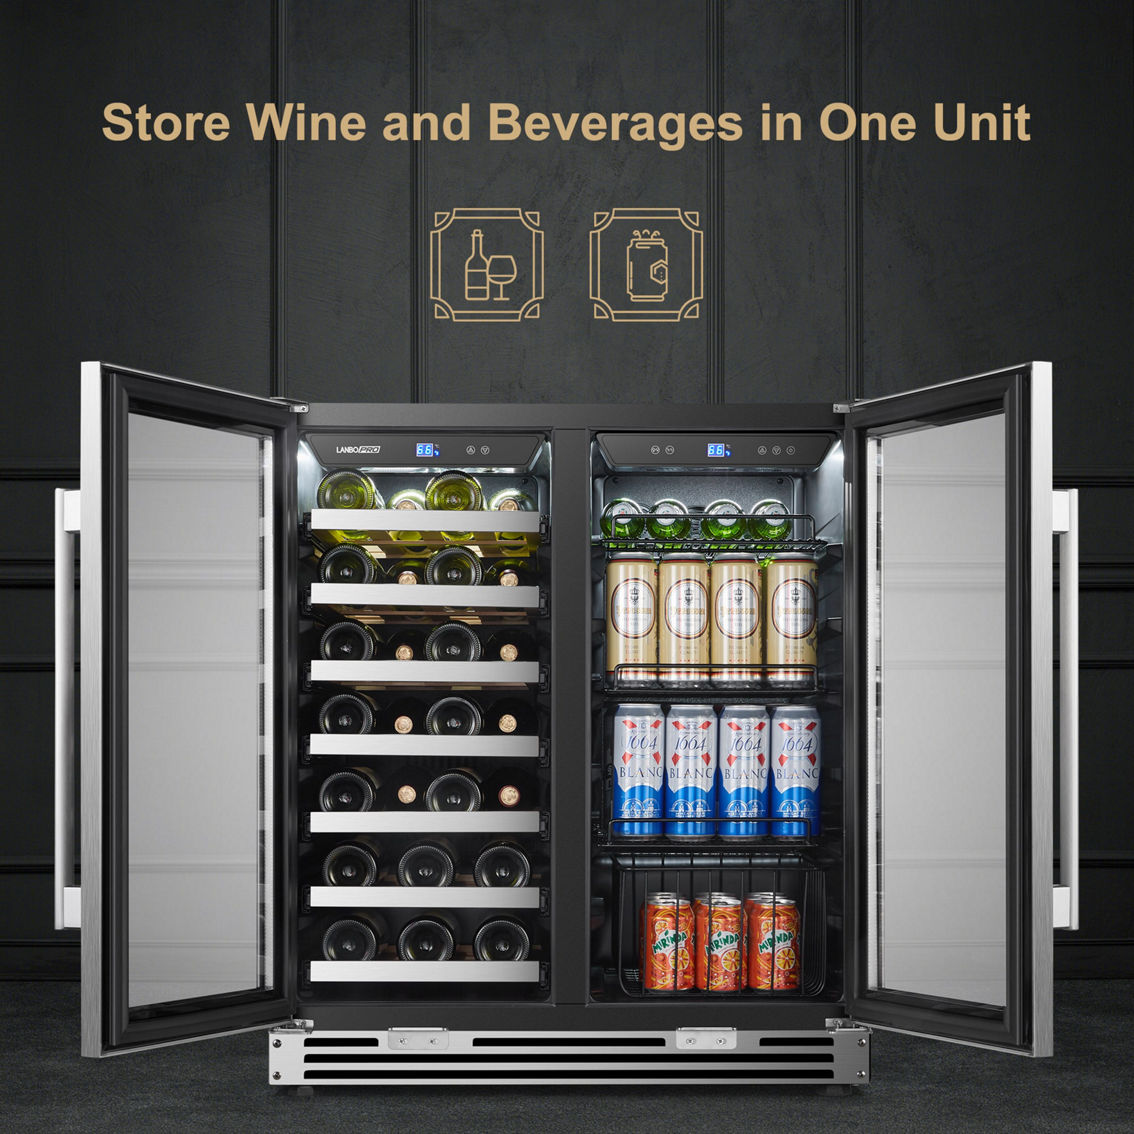 Lanbo Wine and Beverage Cooler Seemless Stainless Steel Trimmed, 26 Bottle 76 Can - Image 5 of 5